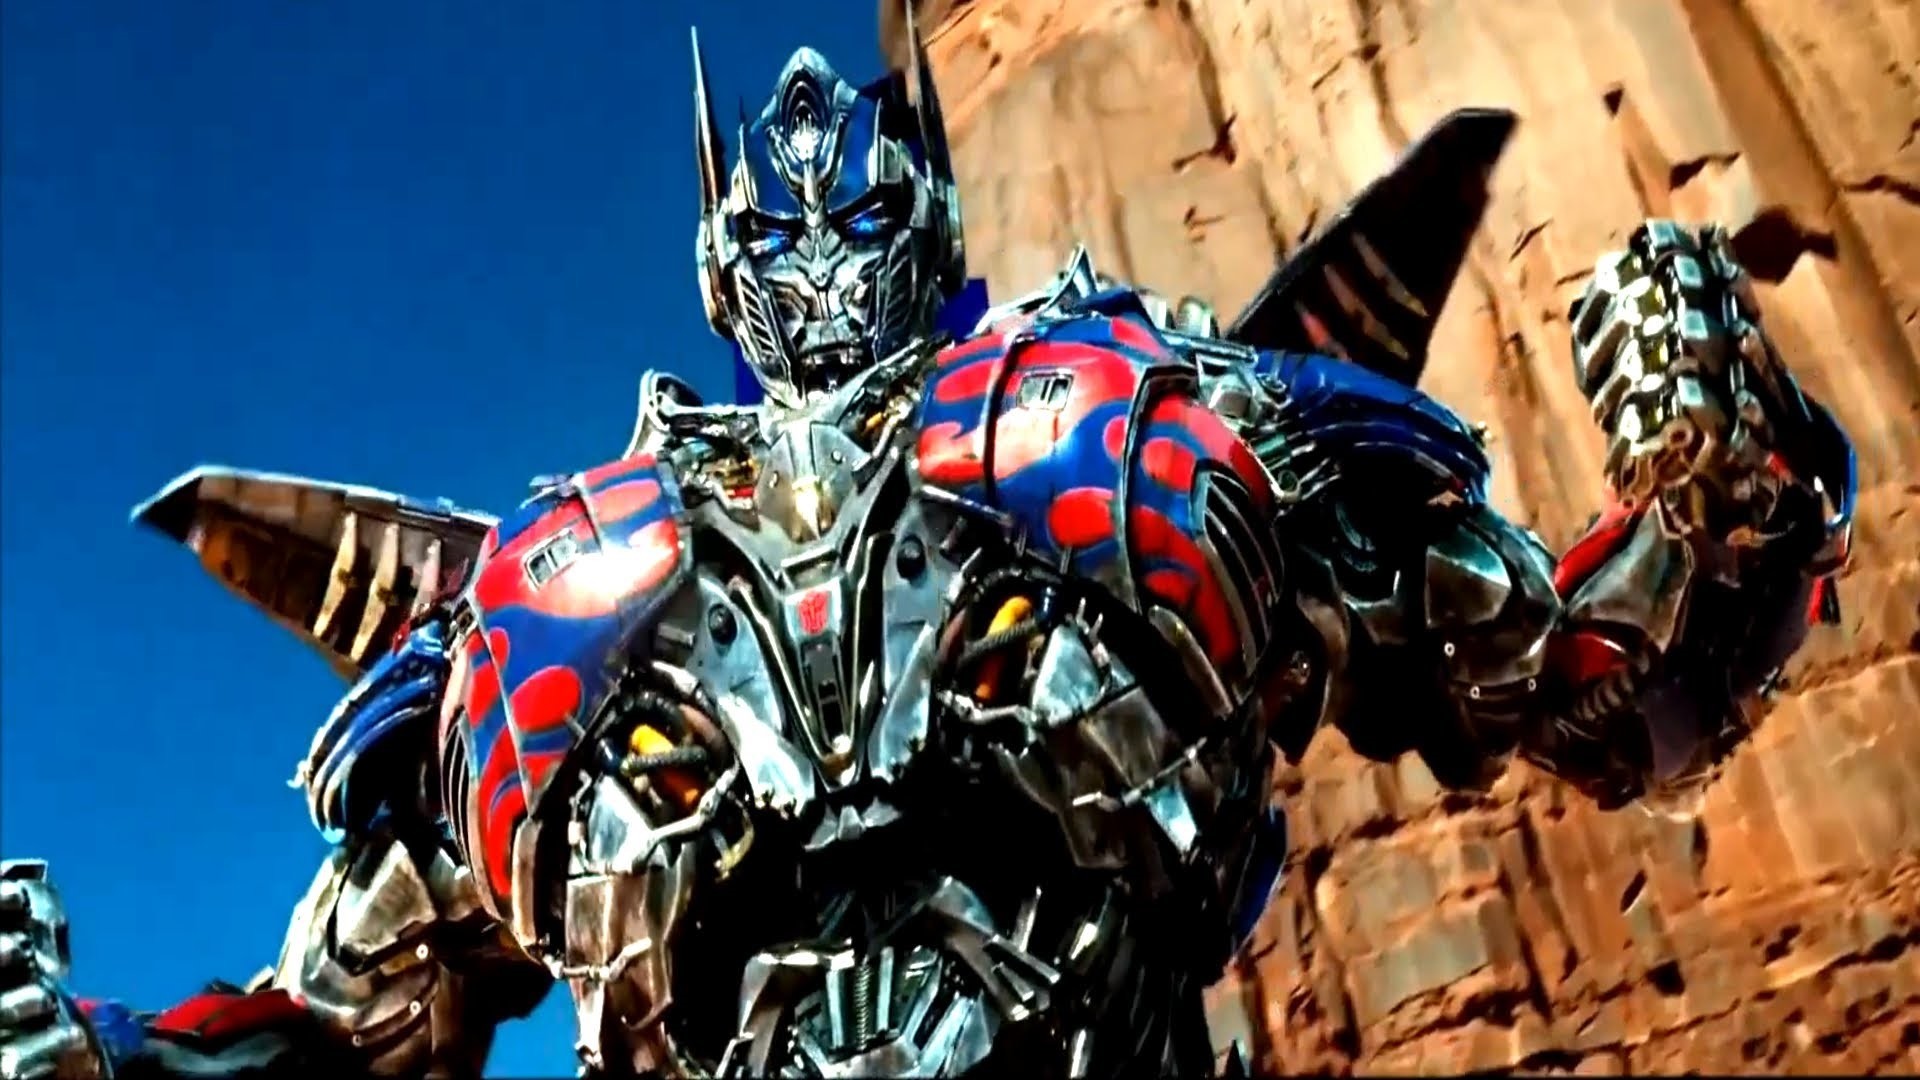 1920x1080 Transformers Optimus Prime Wallpapers (30 Wallpapers) – Adorable Wallpapers